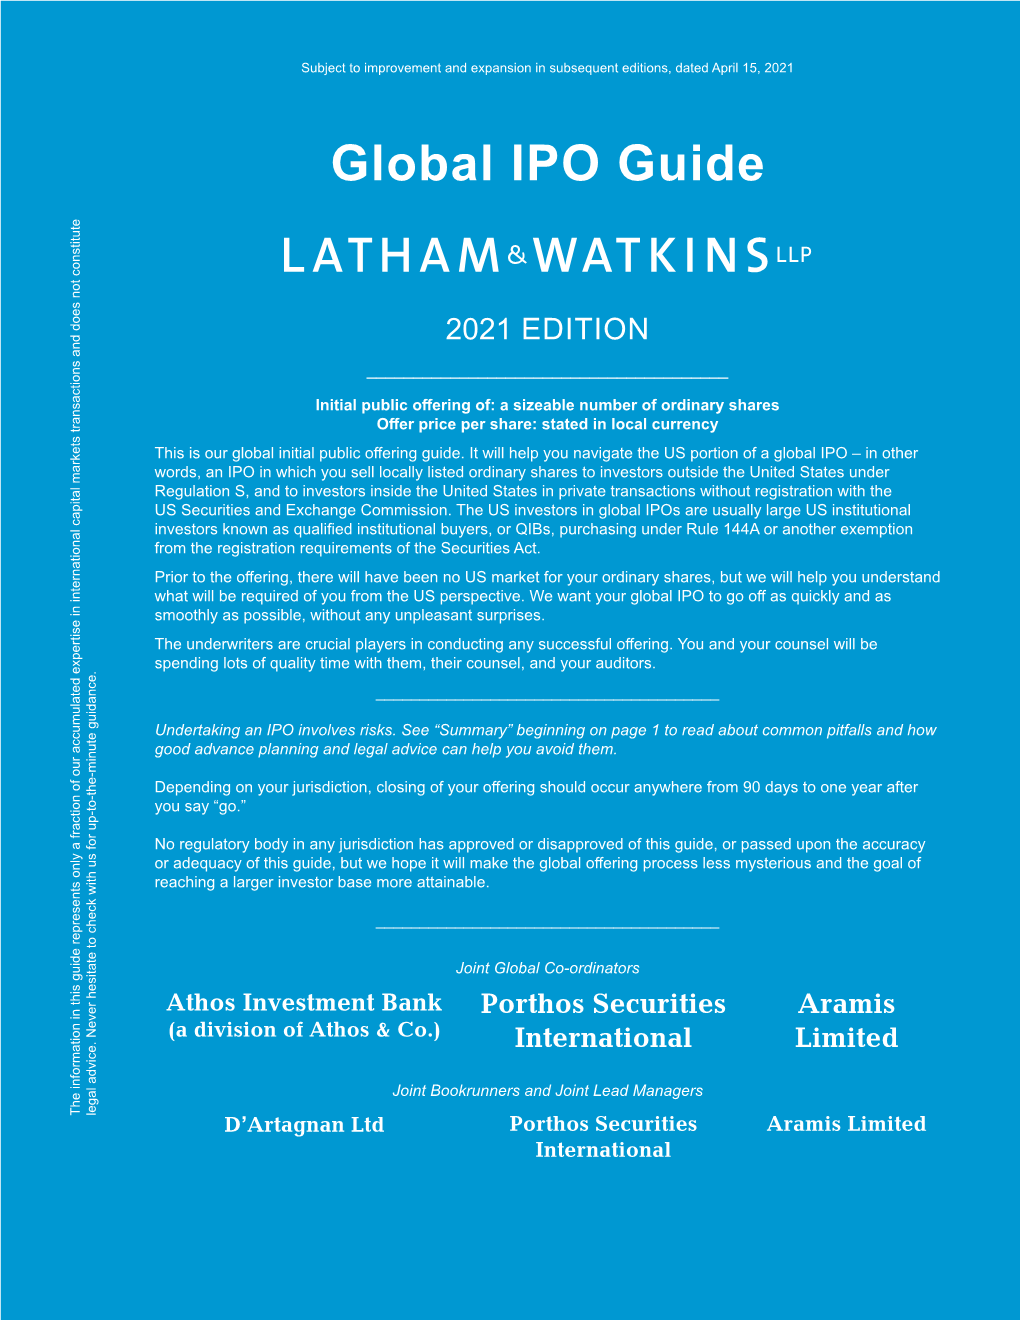 The Latham Global Ipo Guide